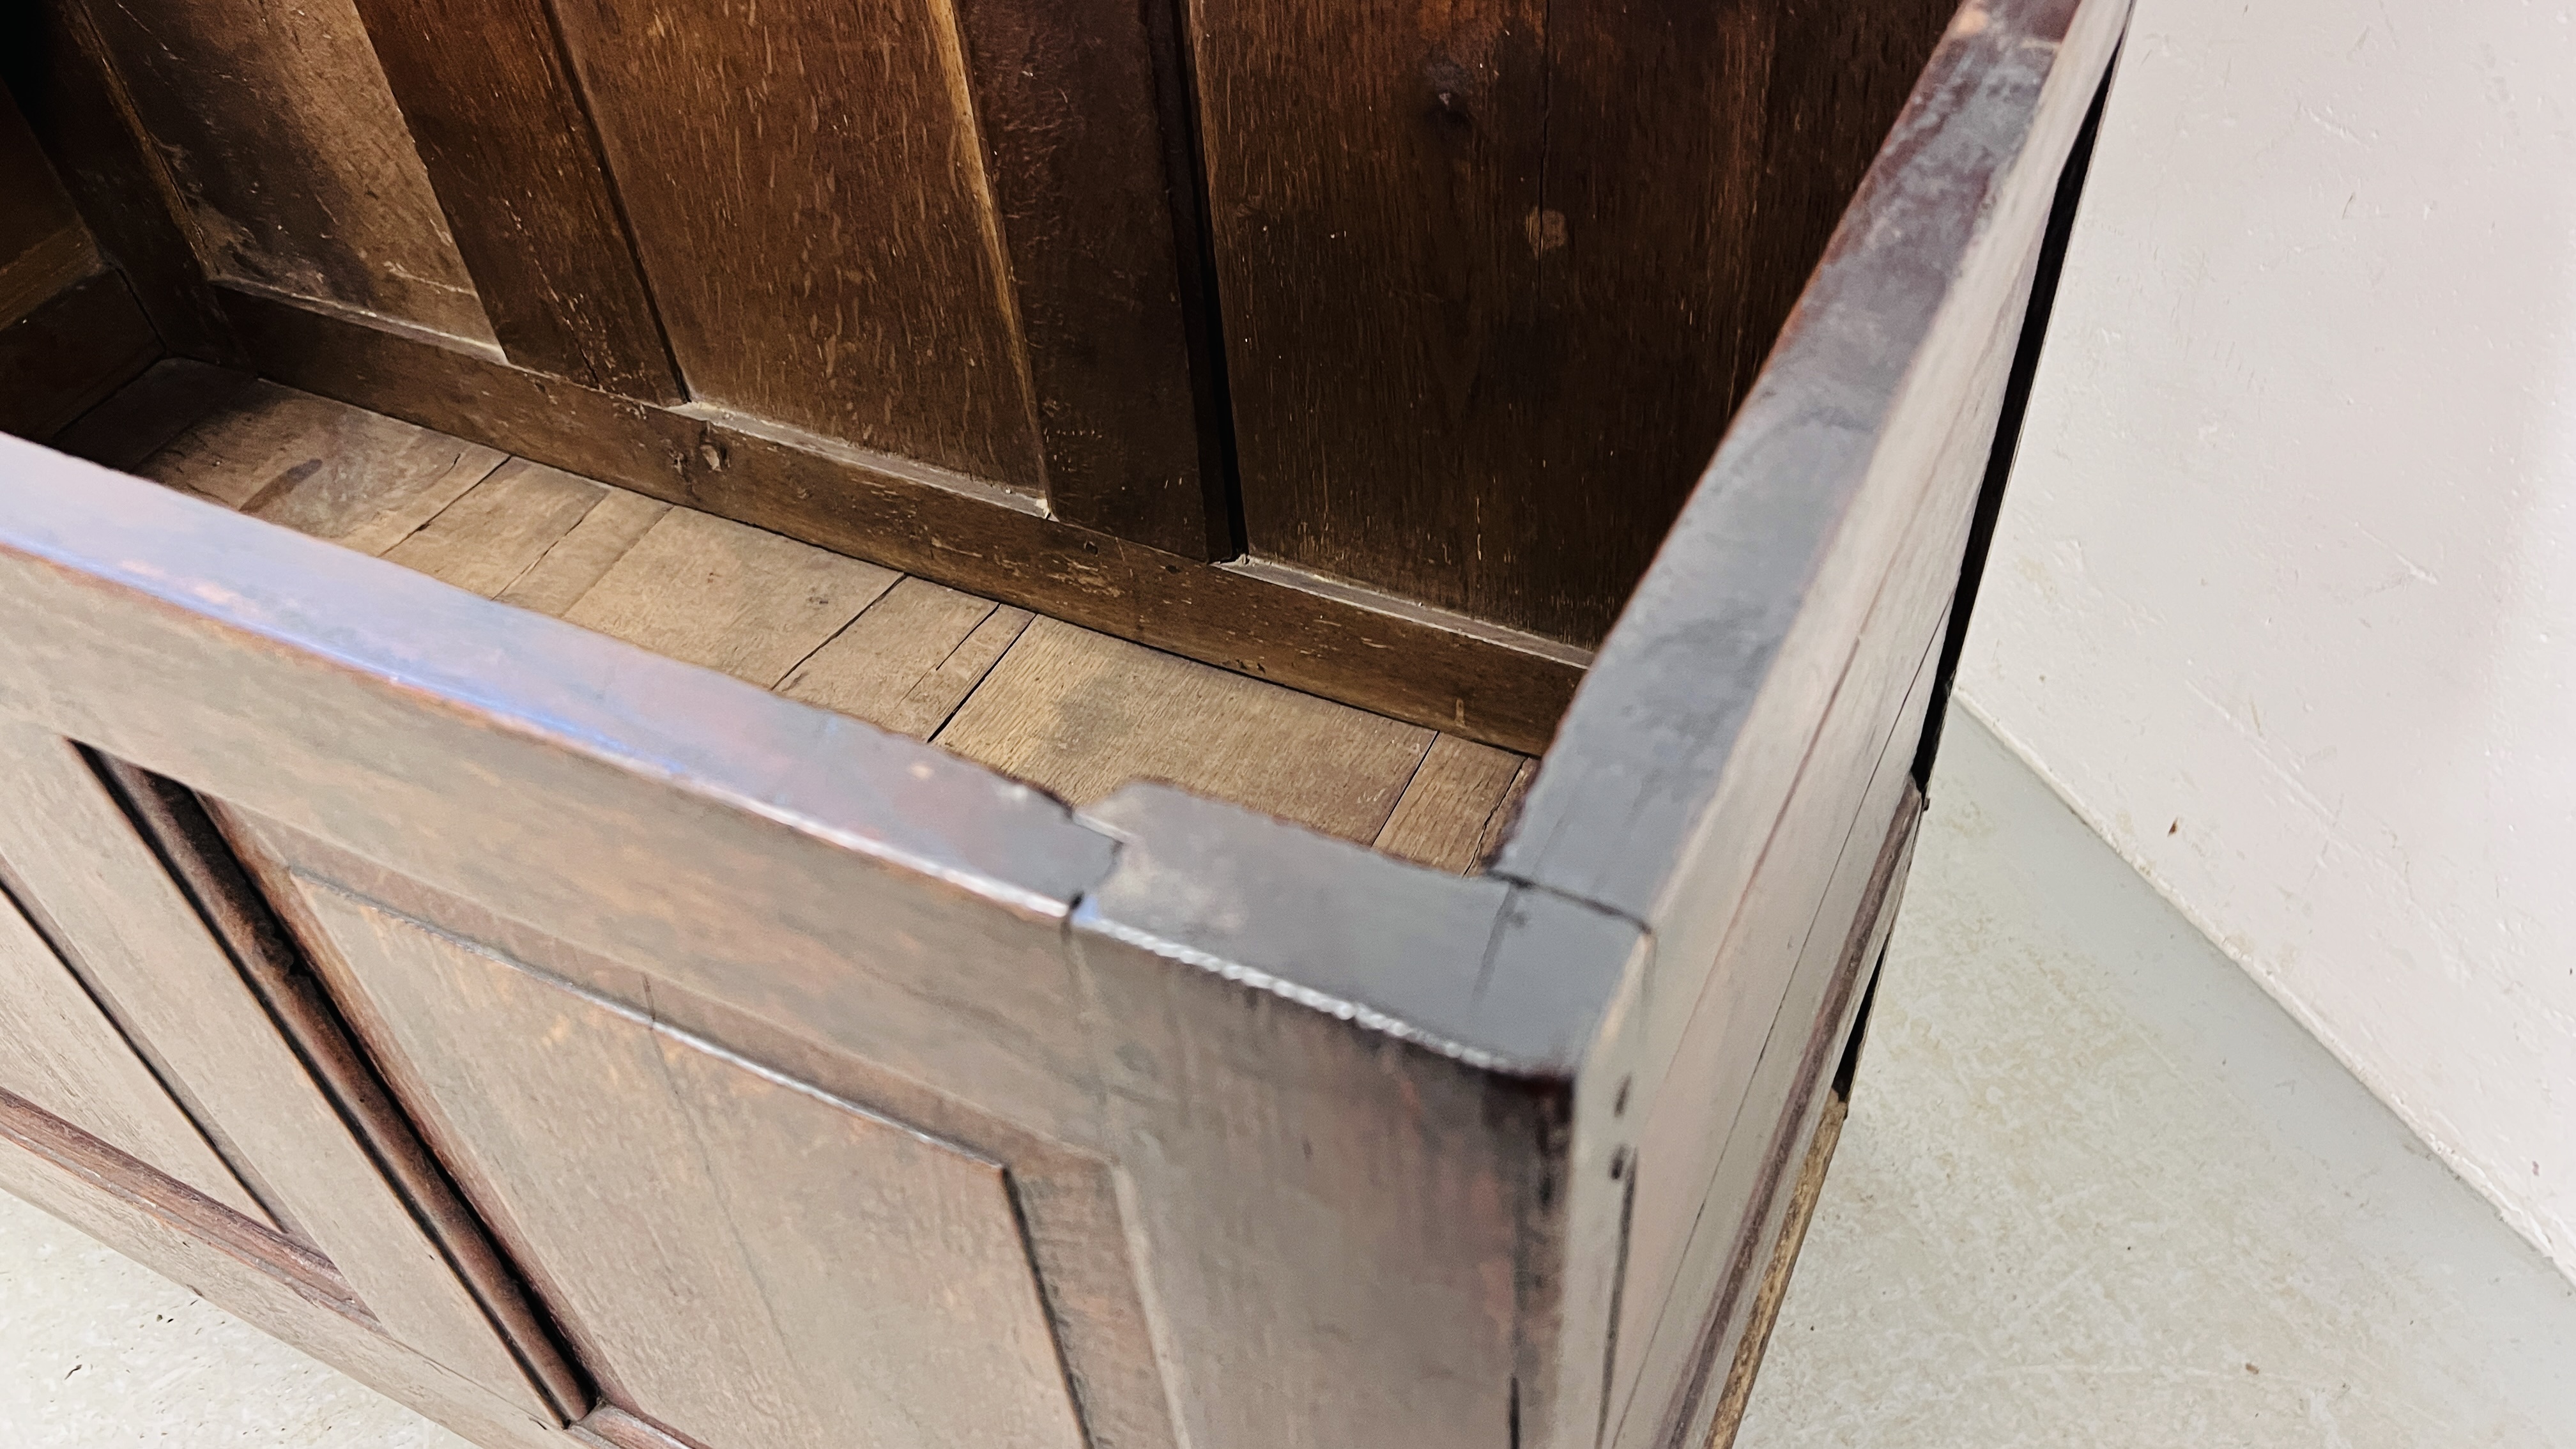 AN EARLY OAK COFFER, THE INTERIOR WITH CANDLE BOX AND TWO SMALL DRAWERS - W 127CM. D 54CM. H 75CM. - Image 18 of 25